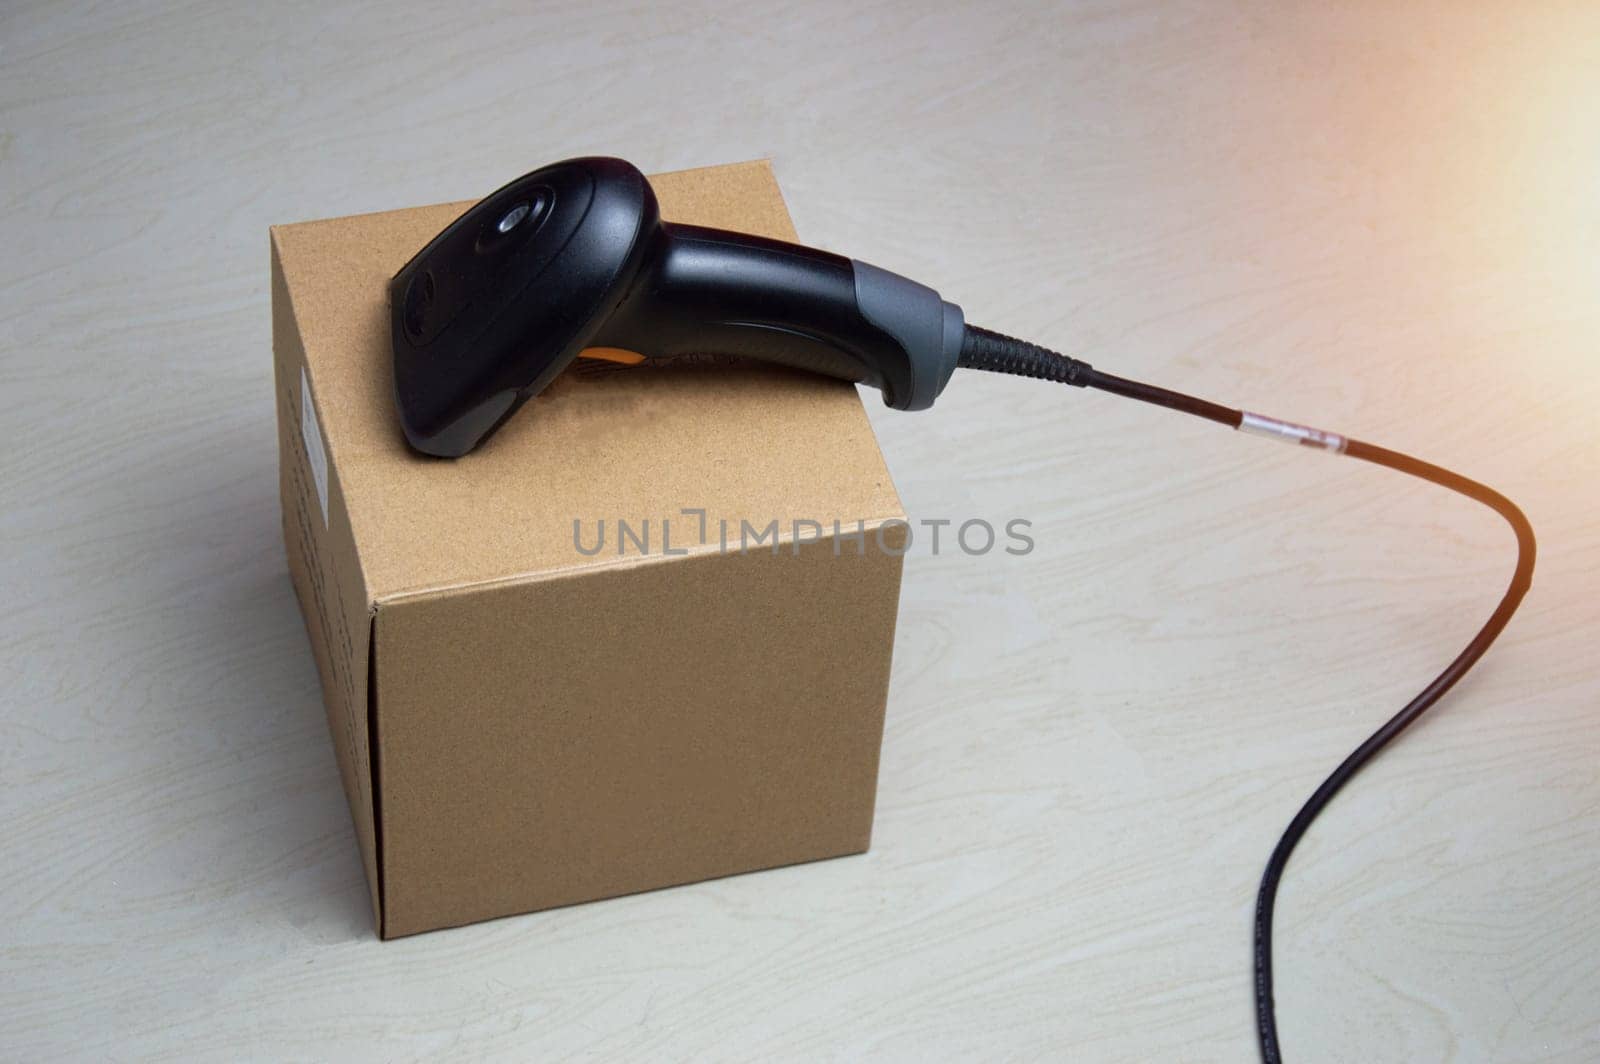 A barcode scanner is placed on a brown box. by boonruen